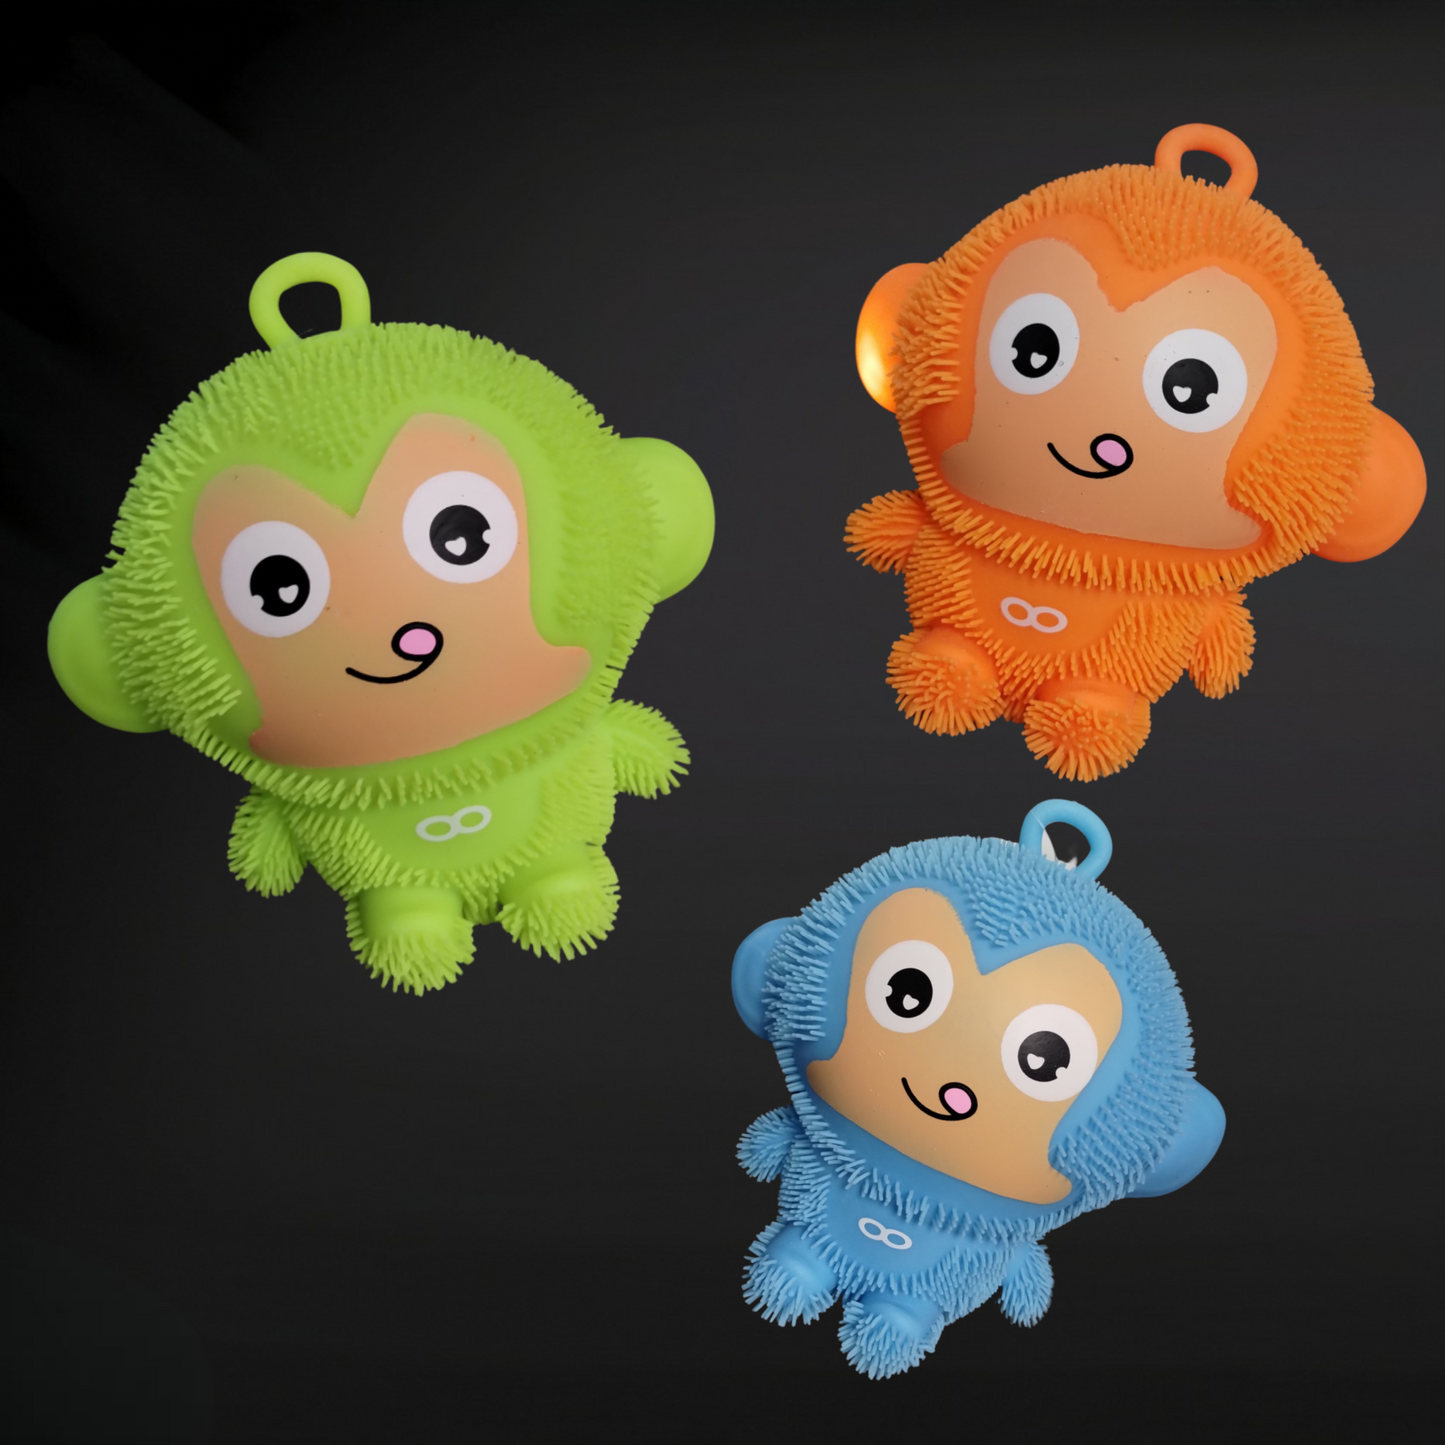 Light Up Puffer Monkey Toy Squishy Squeezey Sensory Squeeze Air Filled Balls - Assorted Colors Zack Wholesale